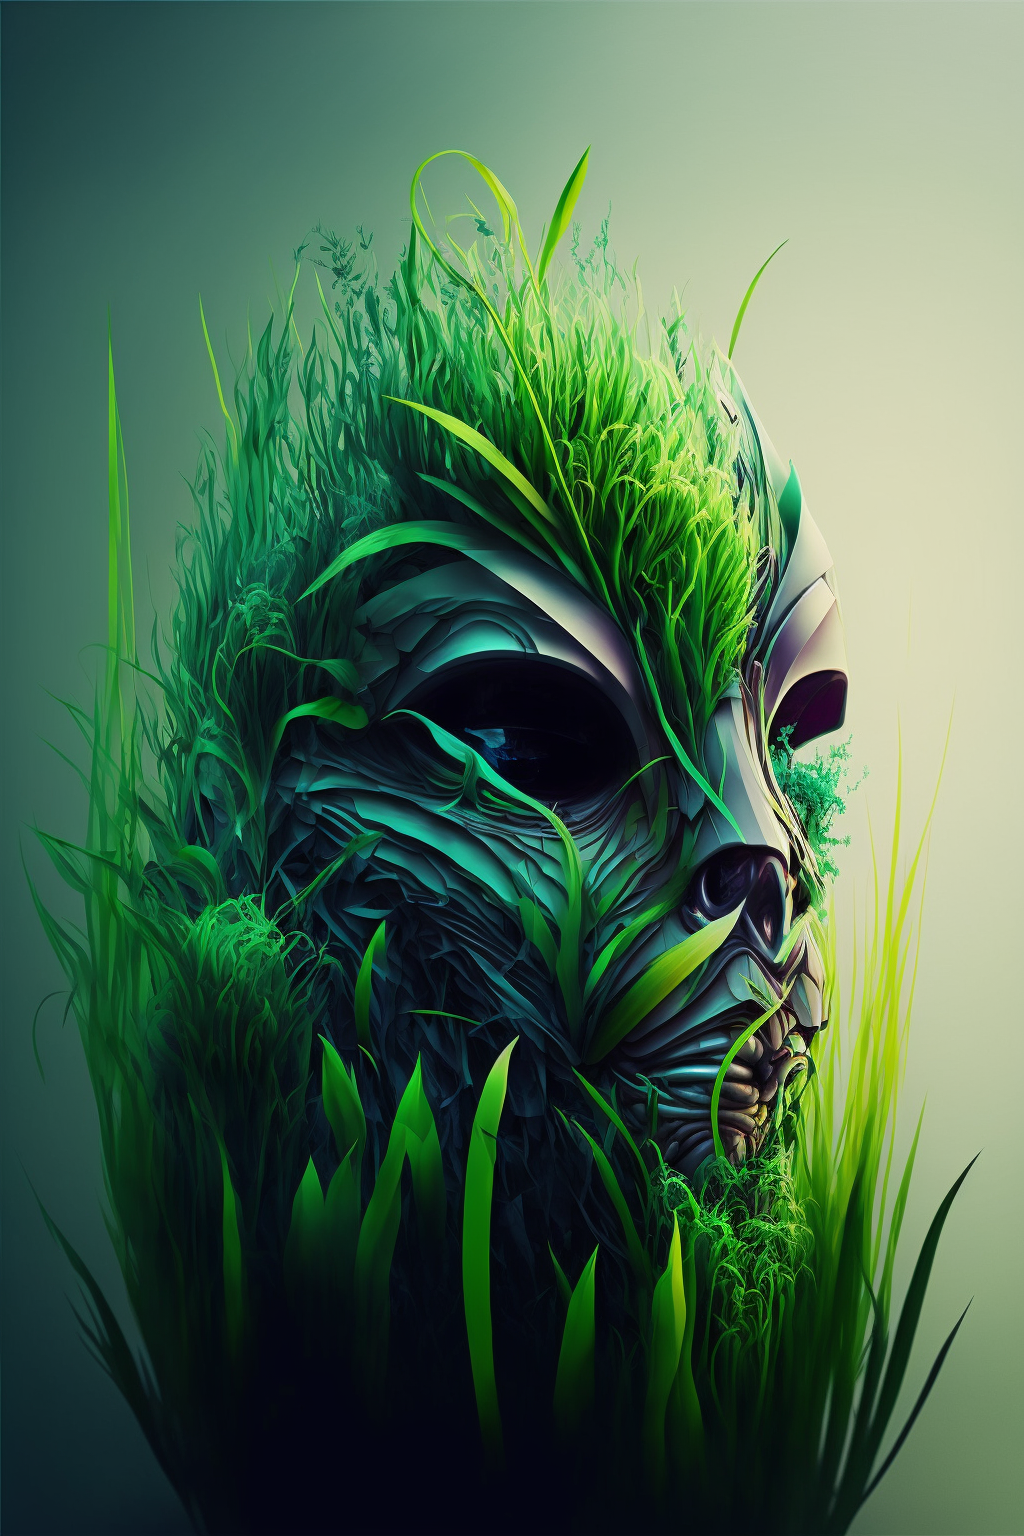 Grass in the style of Kubrickian Synthetic-Digitalism 2